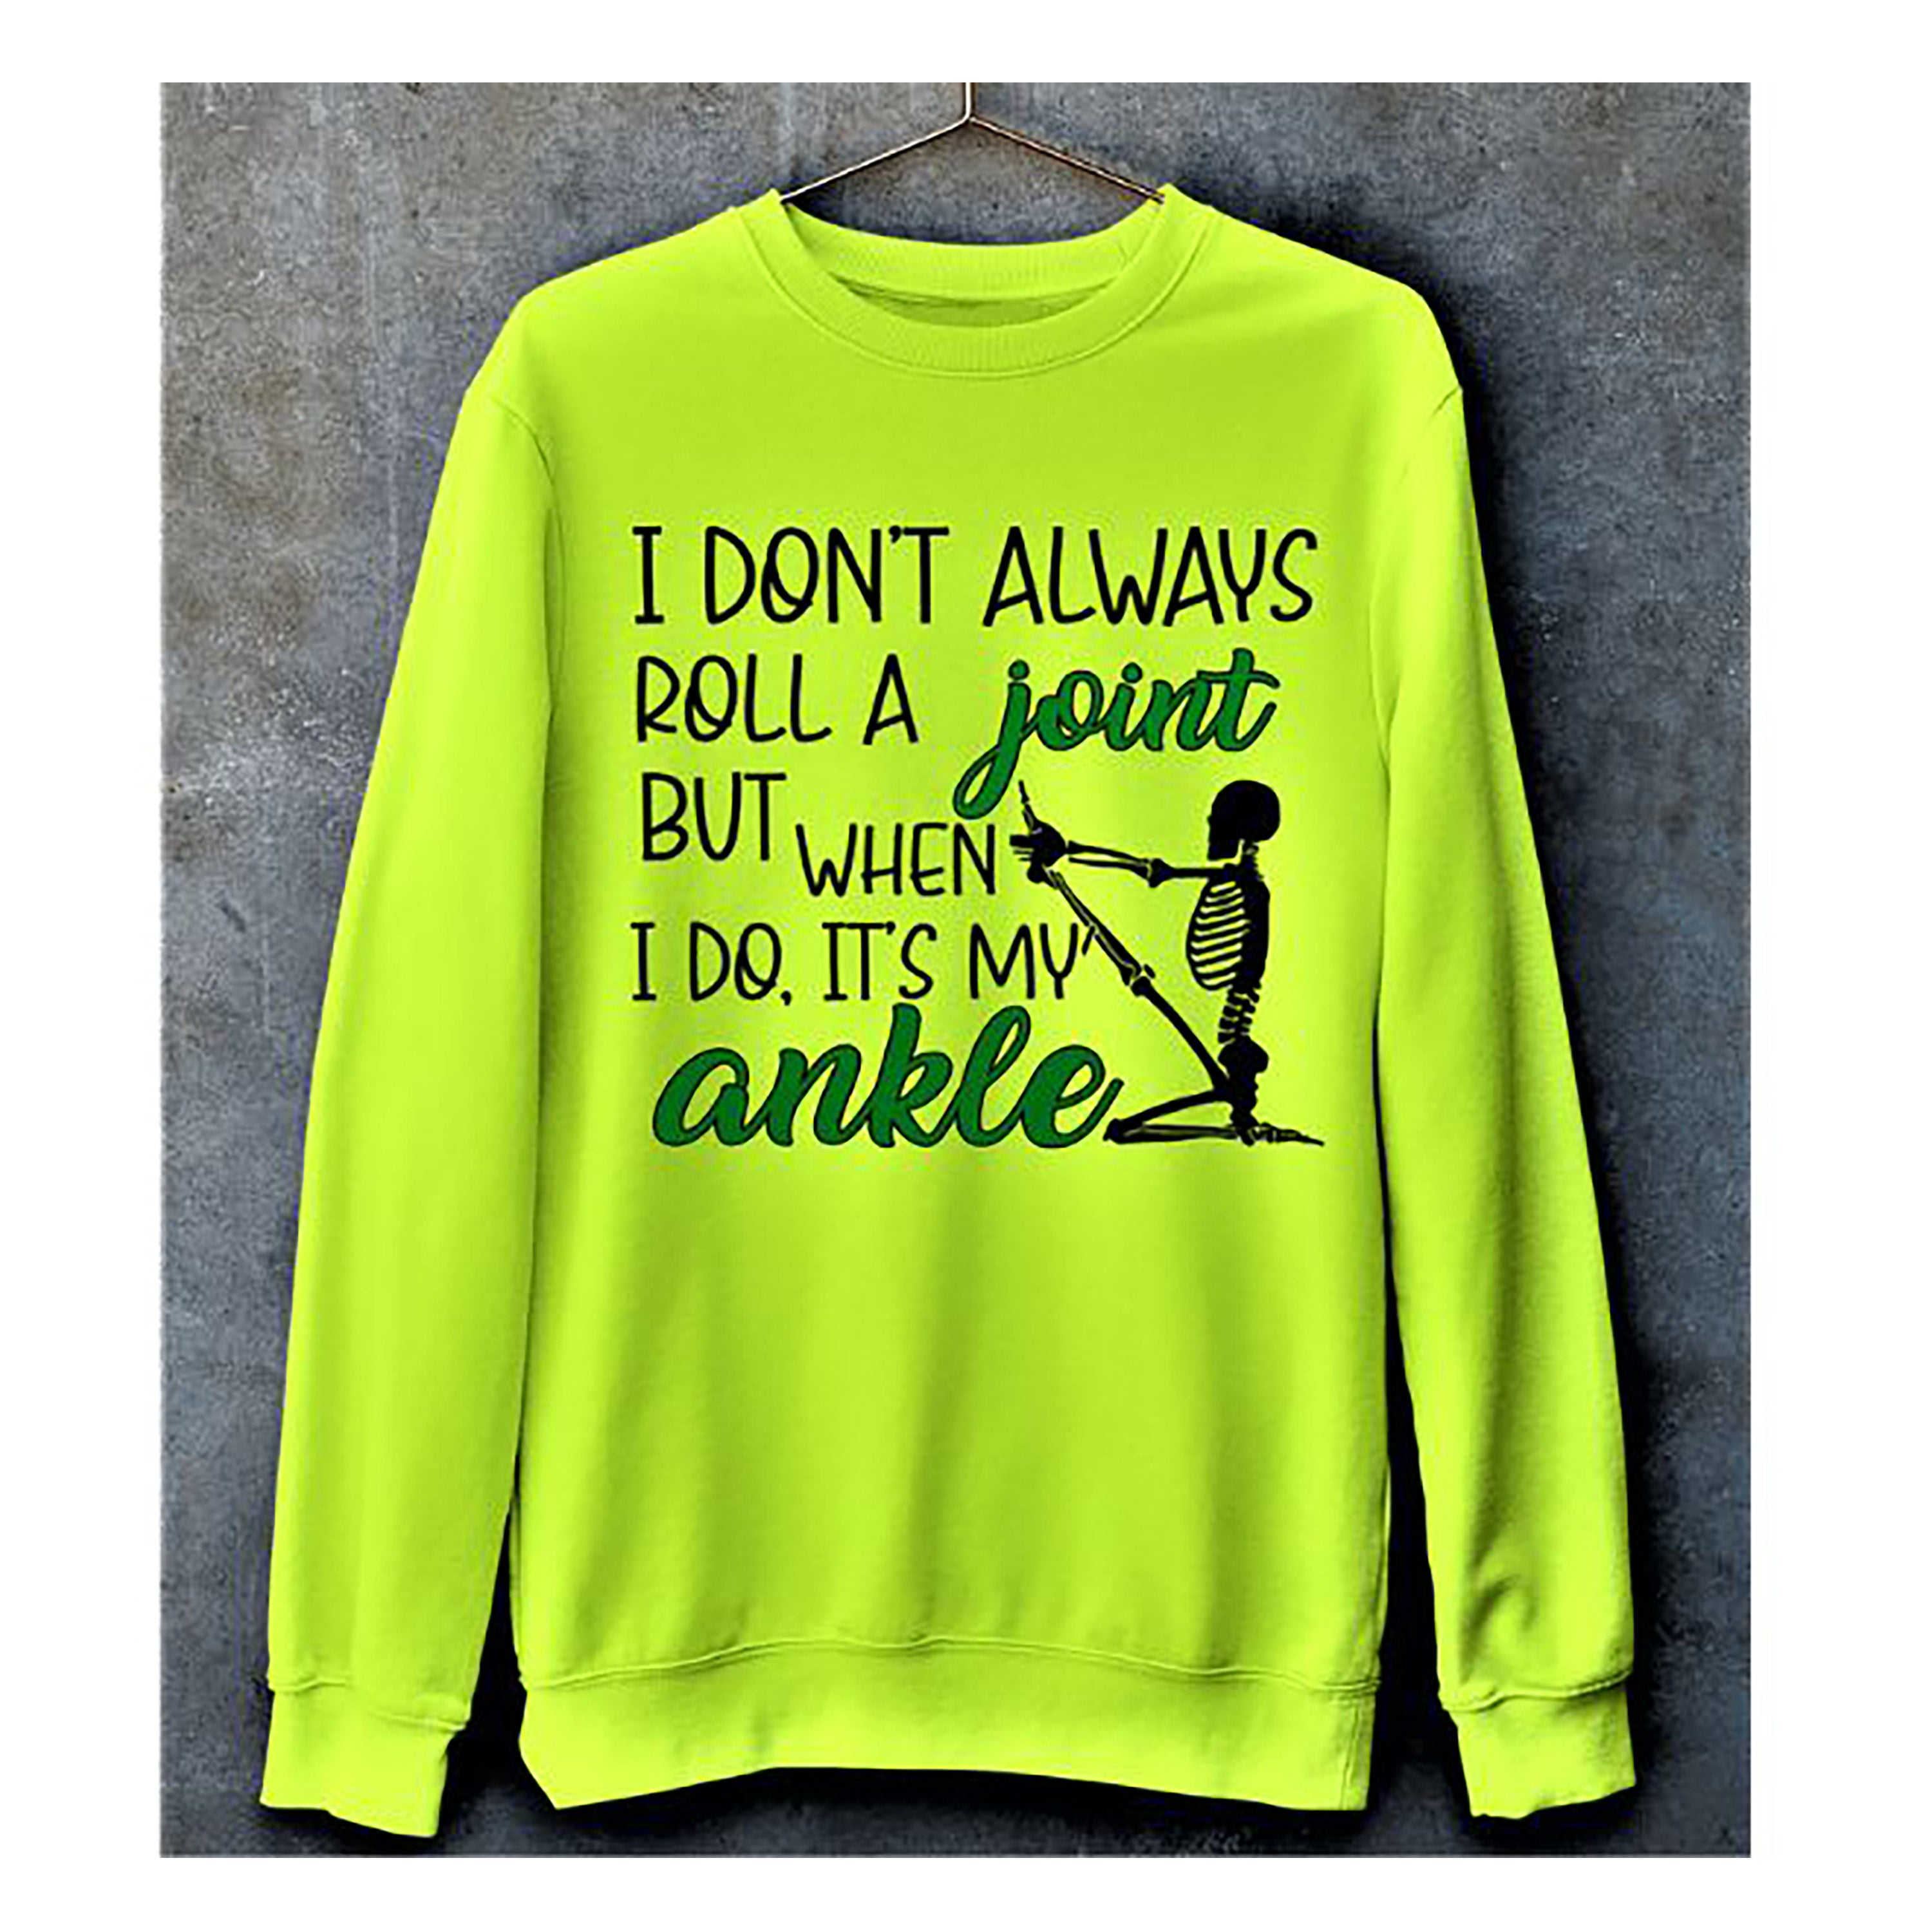 "I DON'T ALWAYS ROLL A JOINT"- Hoodie & Sweatshirt.